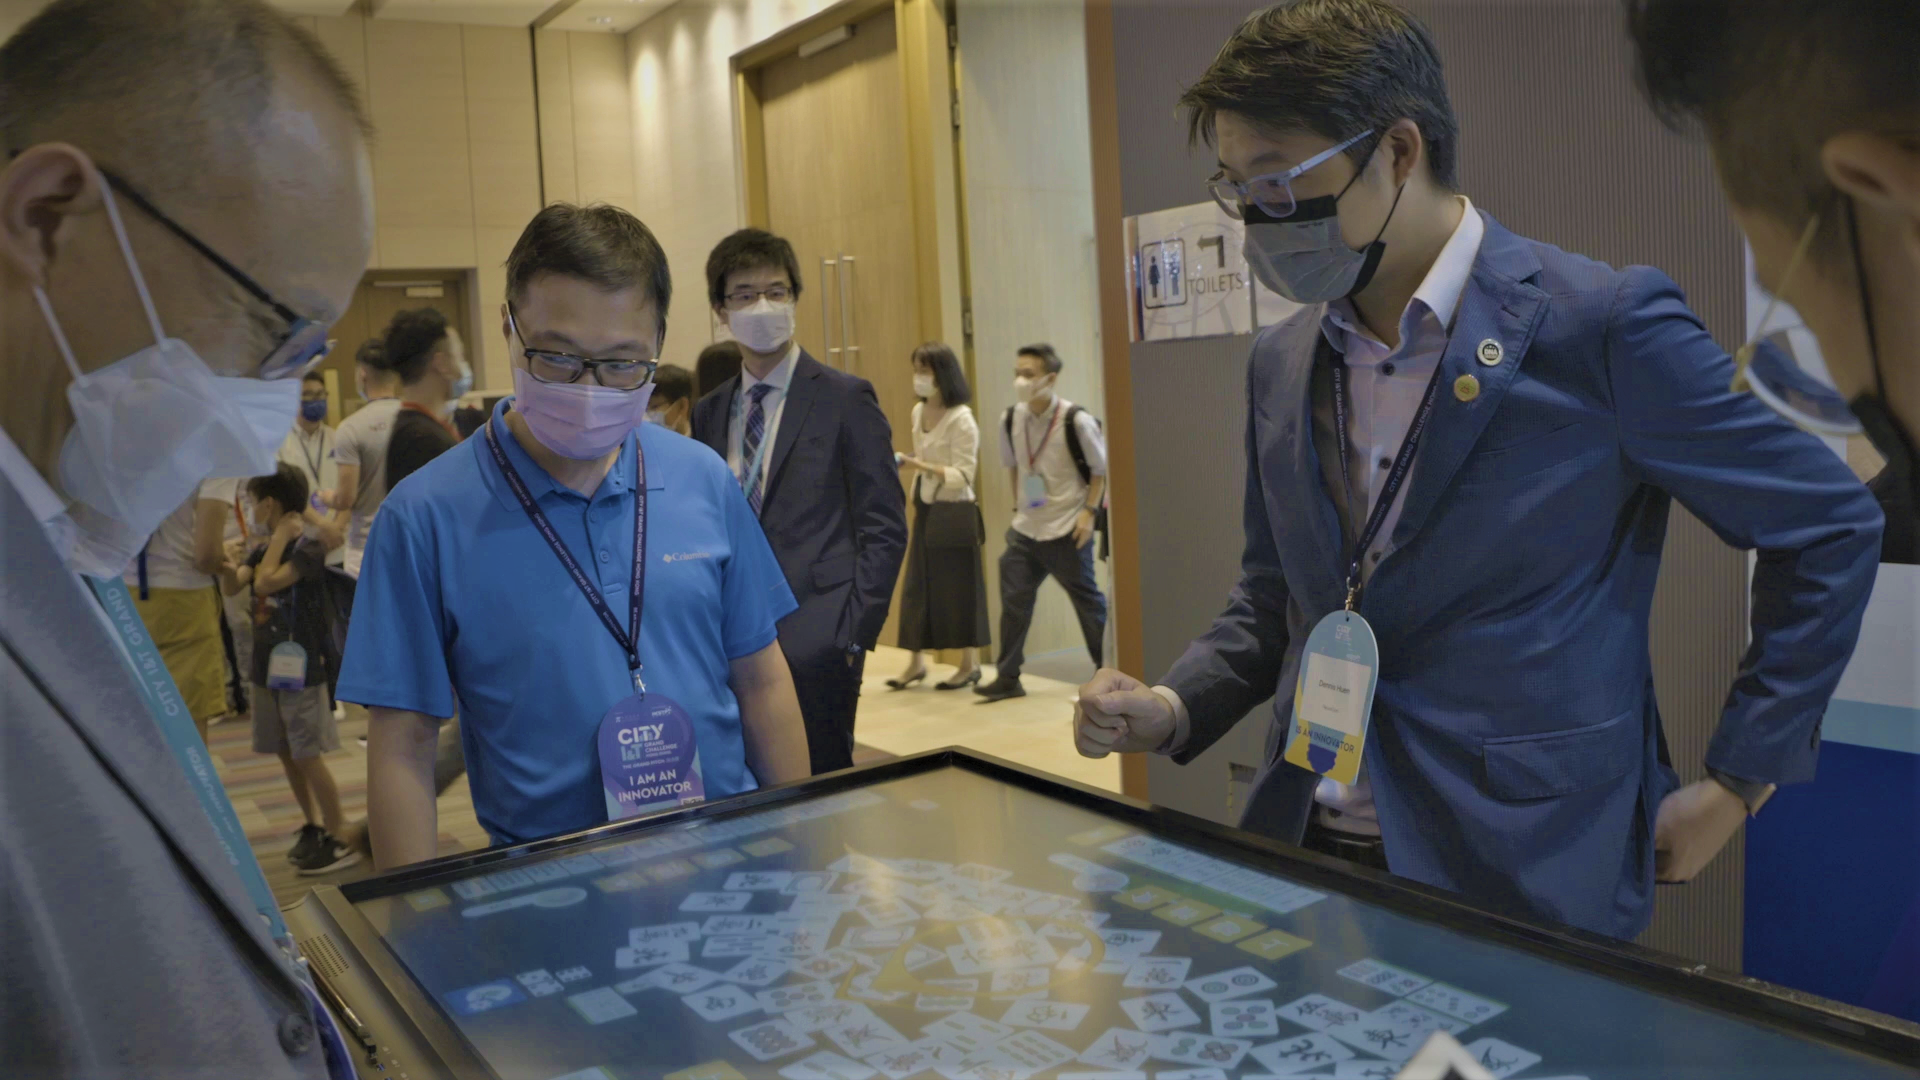 The City I&T Grand Challenge debuted with the theme of “Innovating for Hong Kong’s New Normal”, aiming to recognise the lifestyle changes brought about by the Covid-19 pandemic and the importance of helping people adapt to them.